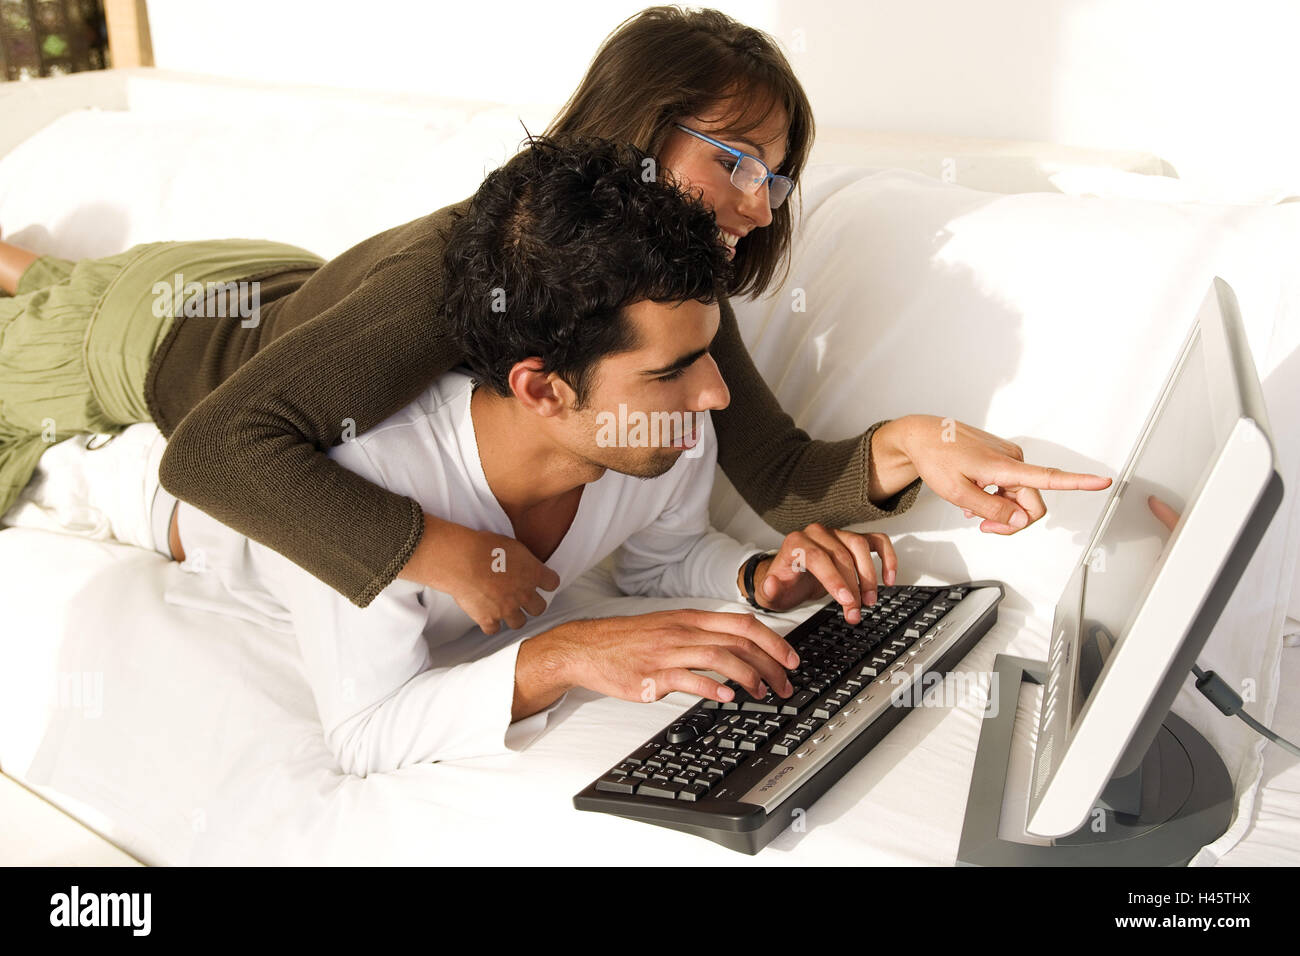 Mate, young, couch, computers, Stock Photo